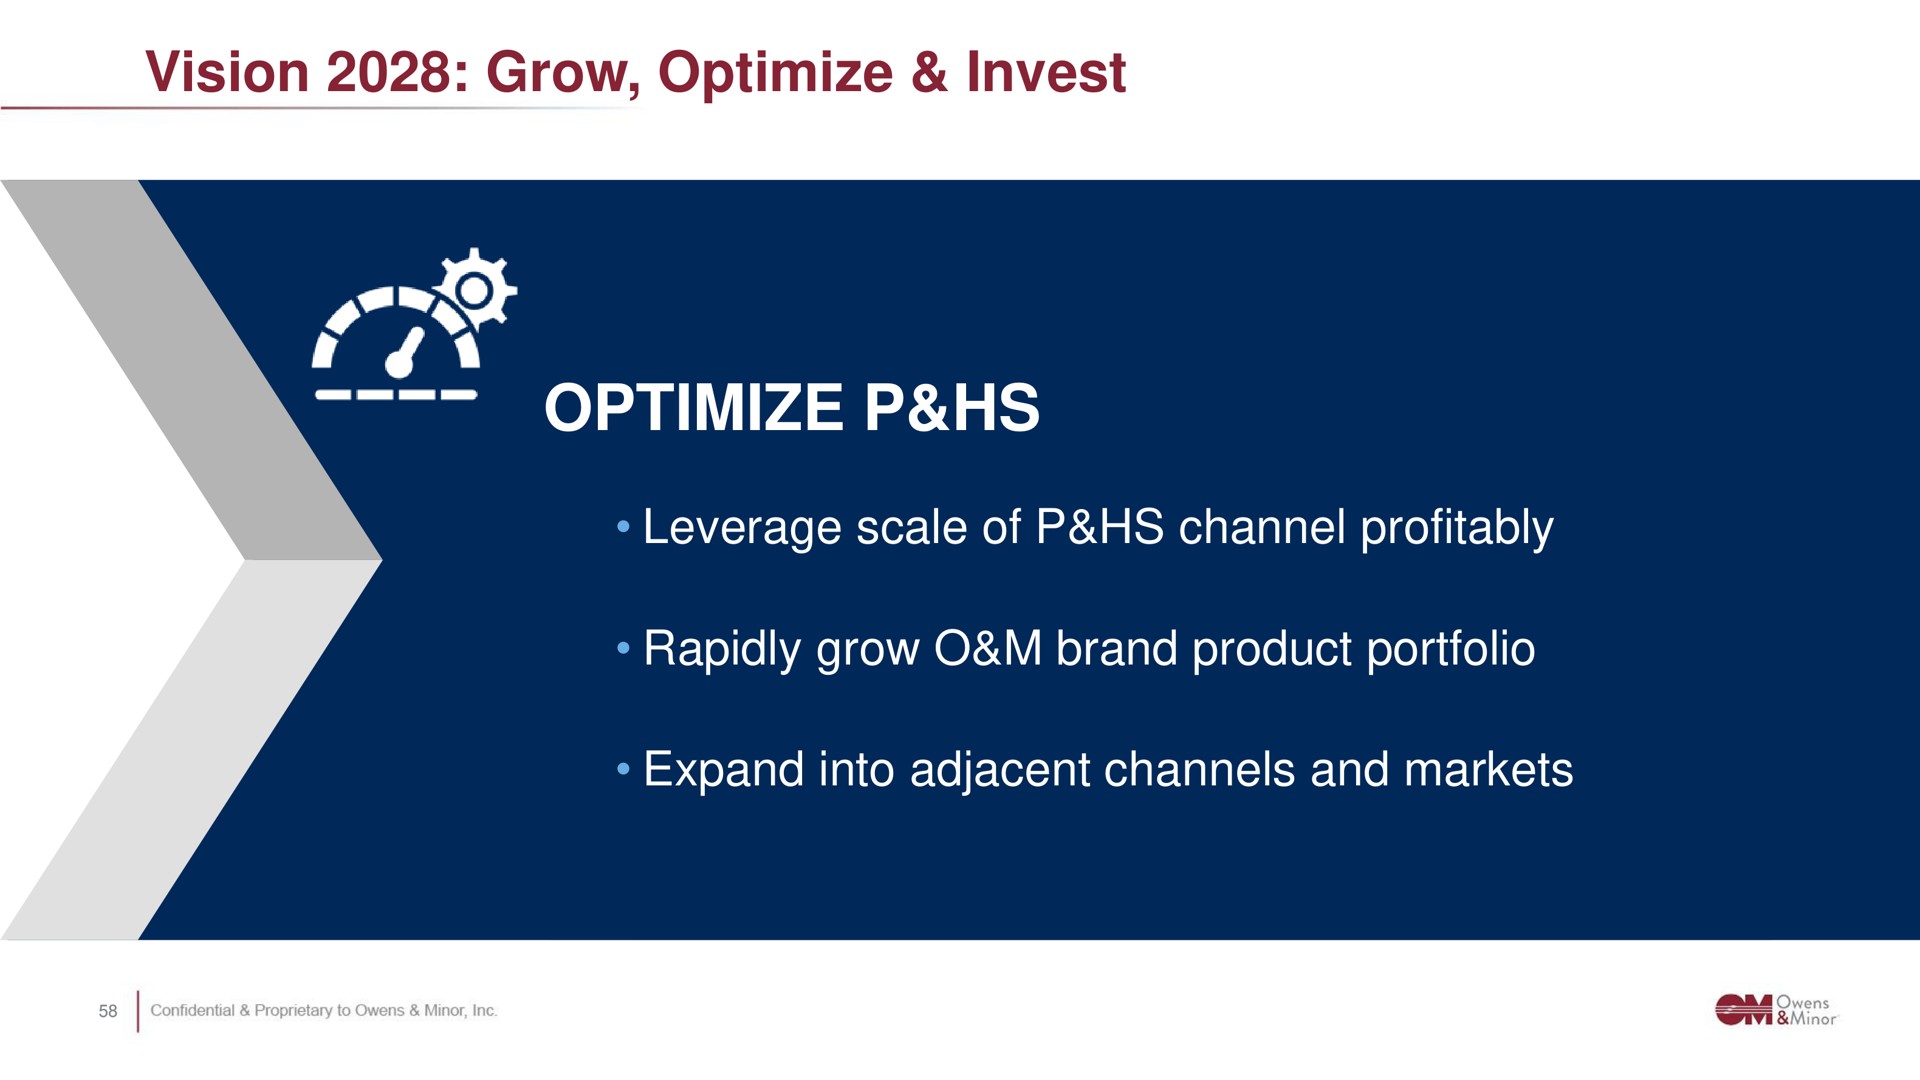 vision grow optimize invest accelerate growth optimize leverage scale of channel profitably optimize rapidly grow brand product portfolio invest to drive value expand into adjacent channels and markets a a | Owens&Minor